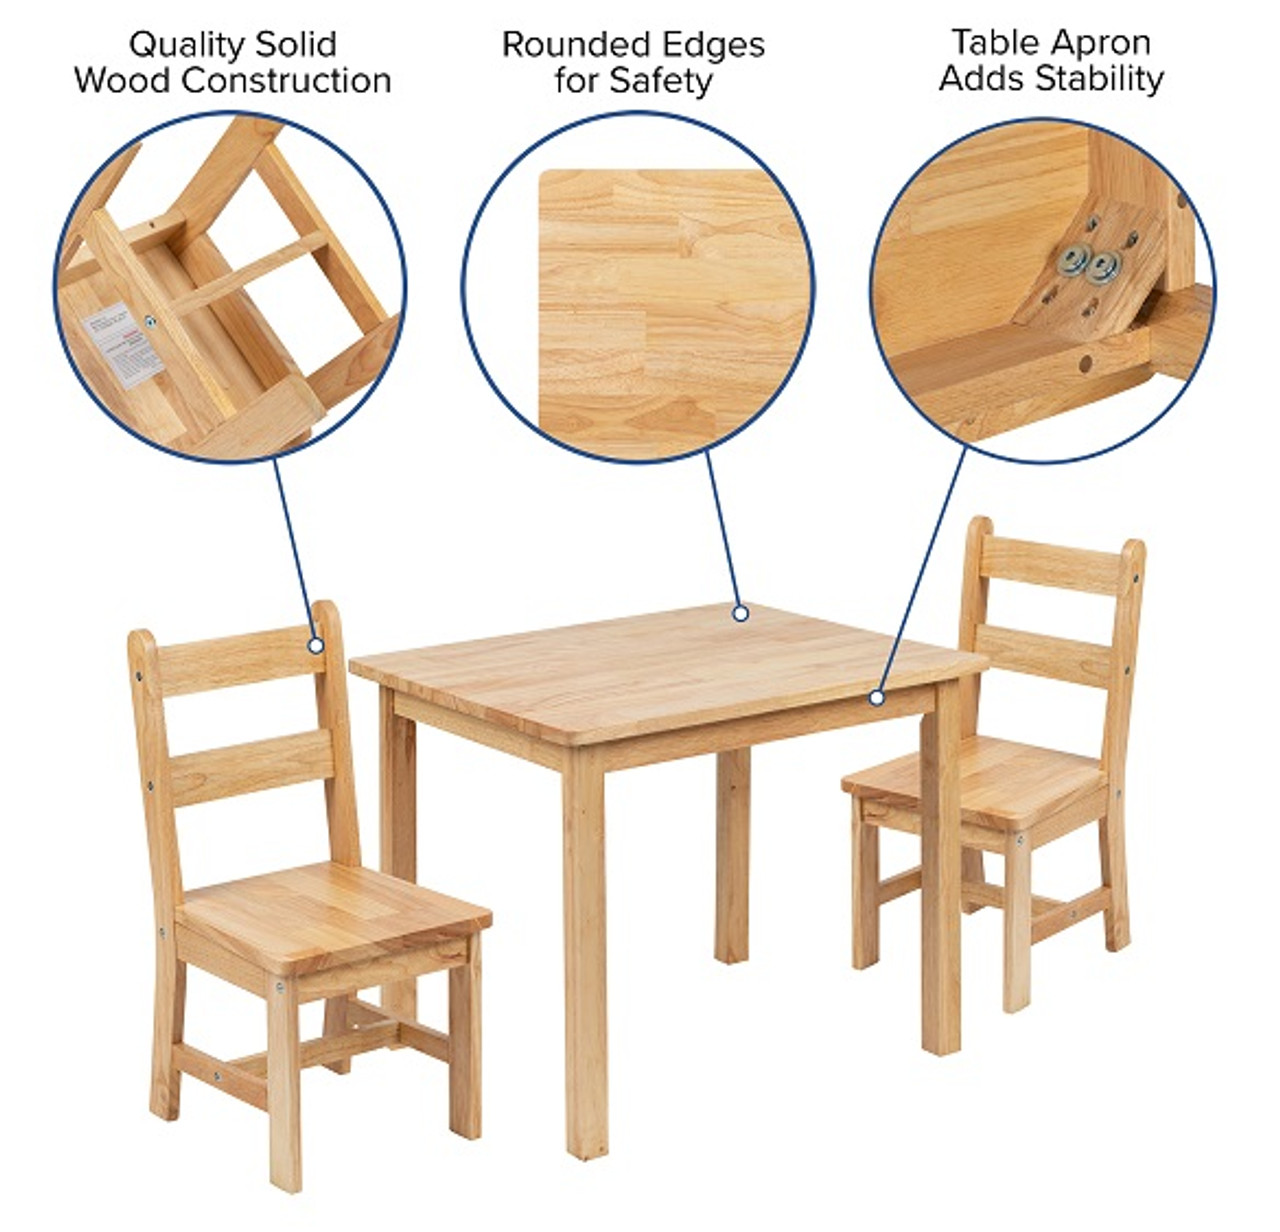 https://cdn11.bigcommerce.com/s-jzfl8u8cx1/images/stencil/1280x1280/products/6436/27491/Cameron_Natural_Kids_Tables_and_Chairs_Safety_Features__63520.1648065587.jpg?c=1?imbypass=on